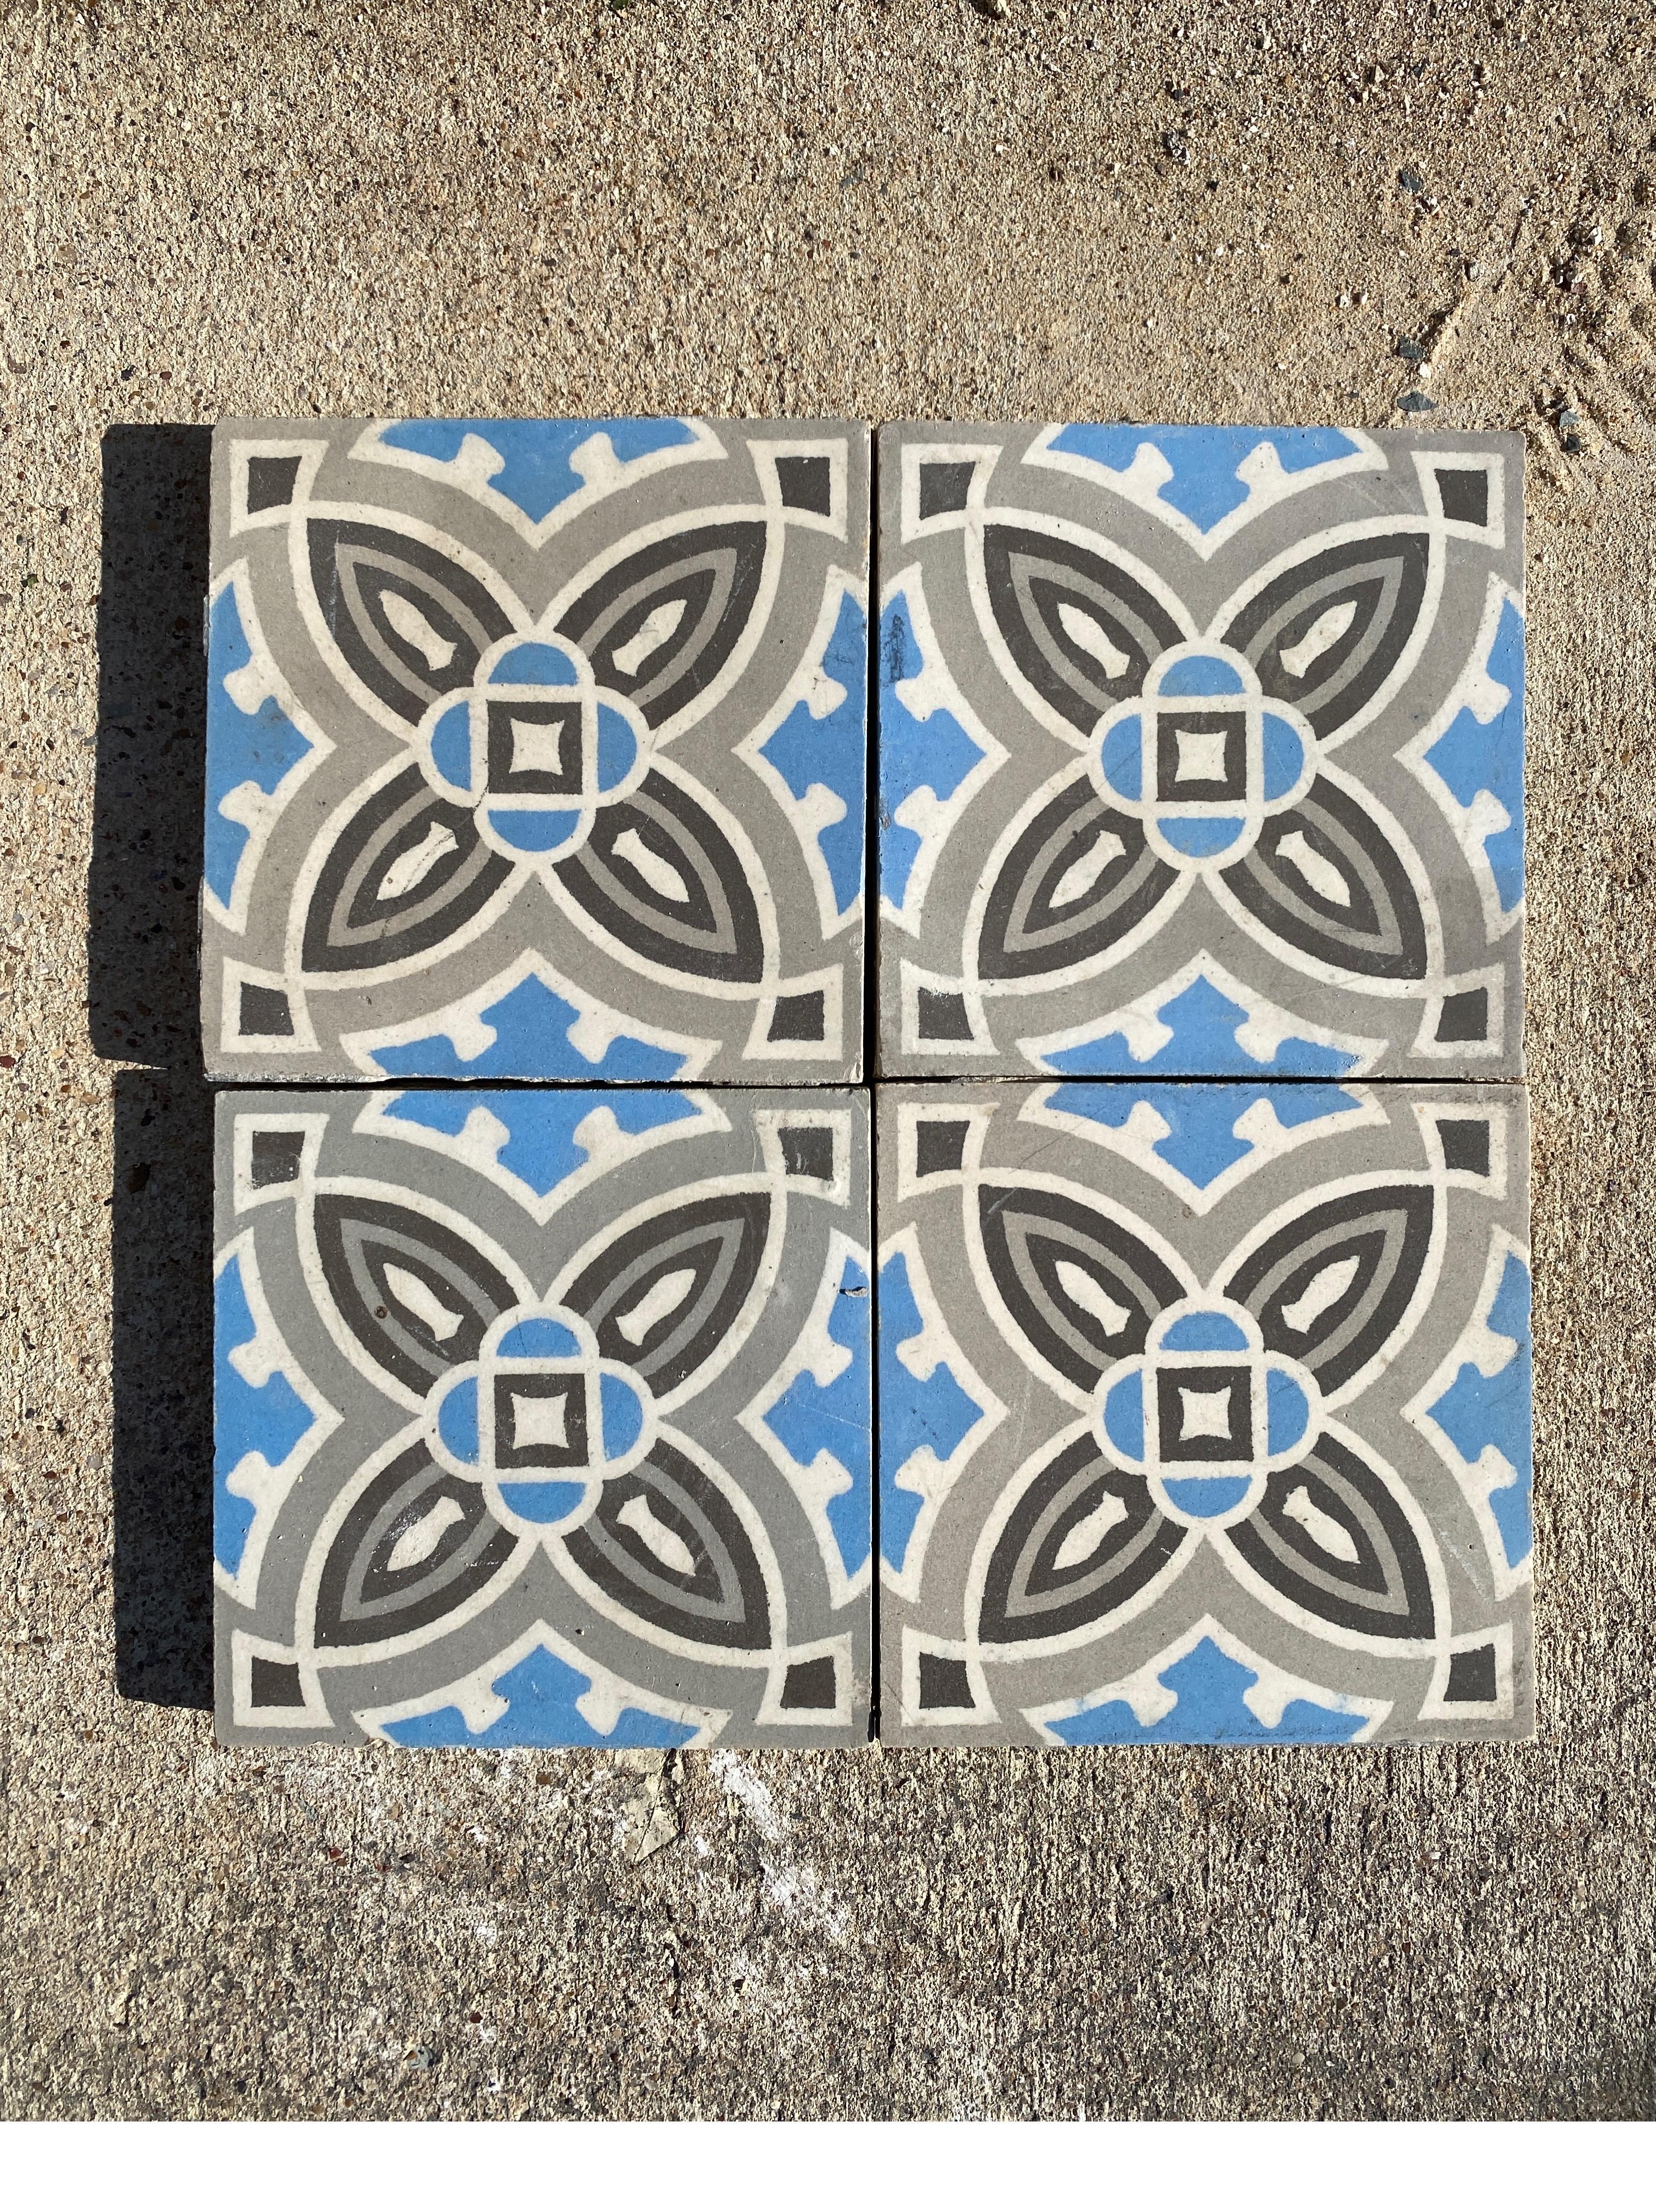 Blue and grey encaustic tiles with beautiful floral borders.

Measures: Borders 2.75